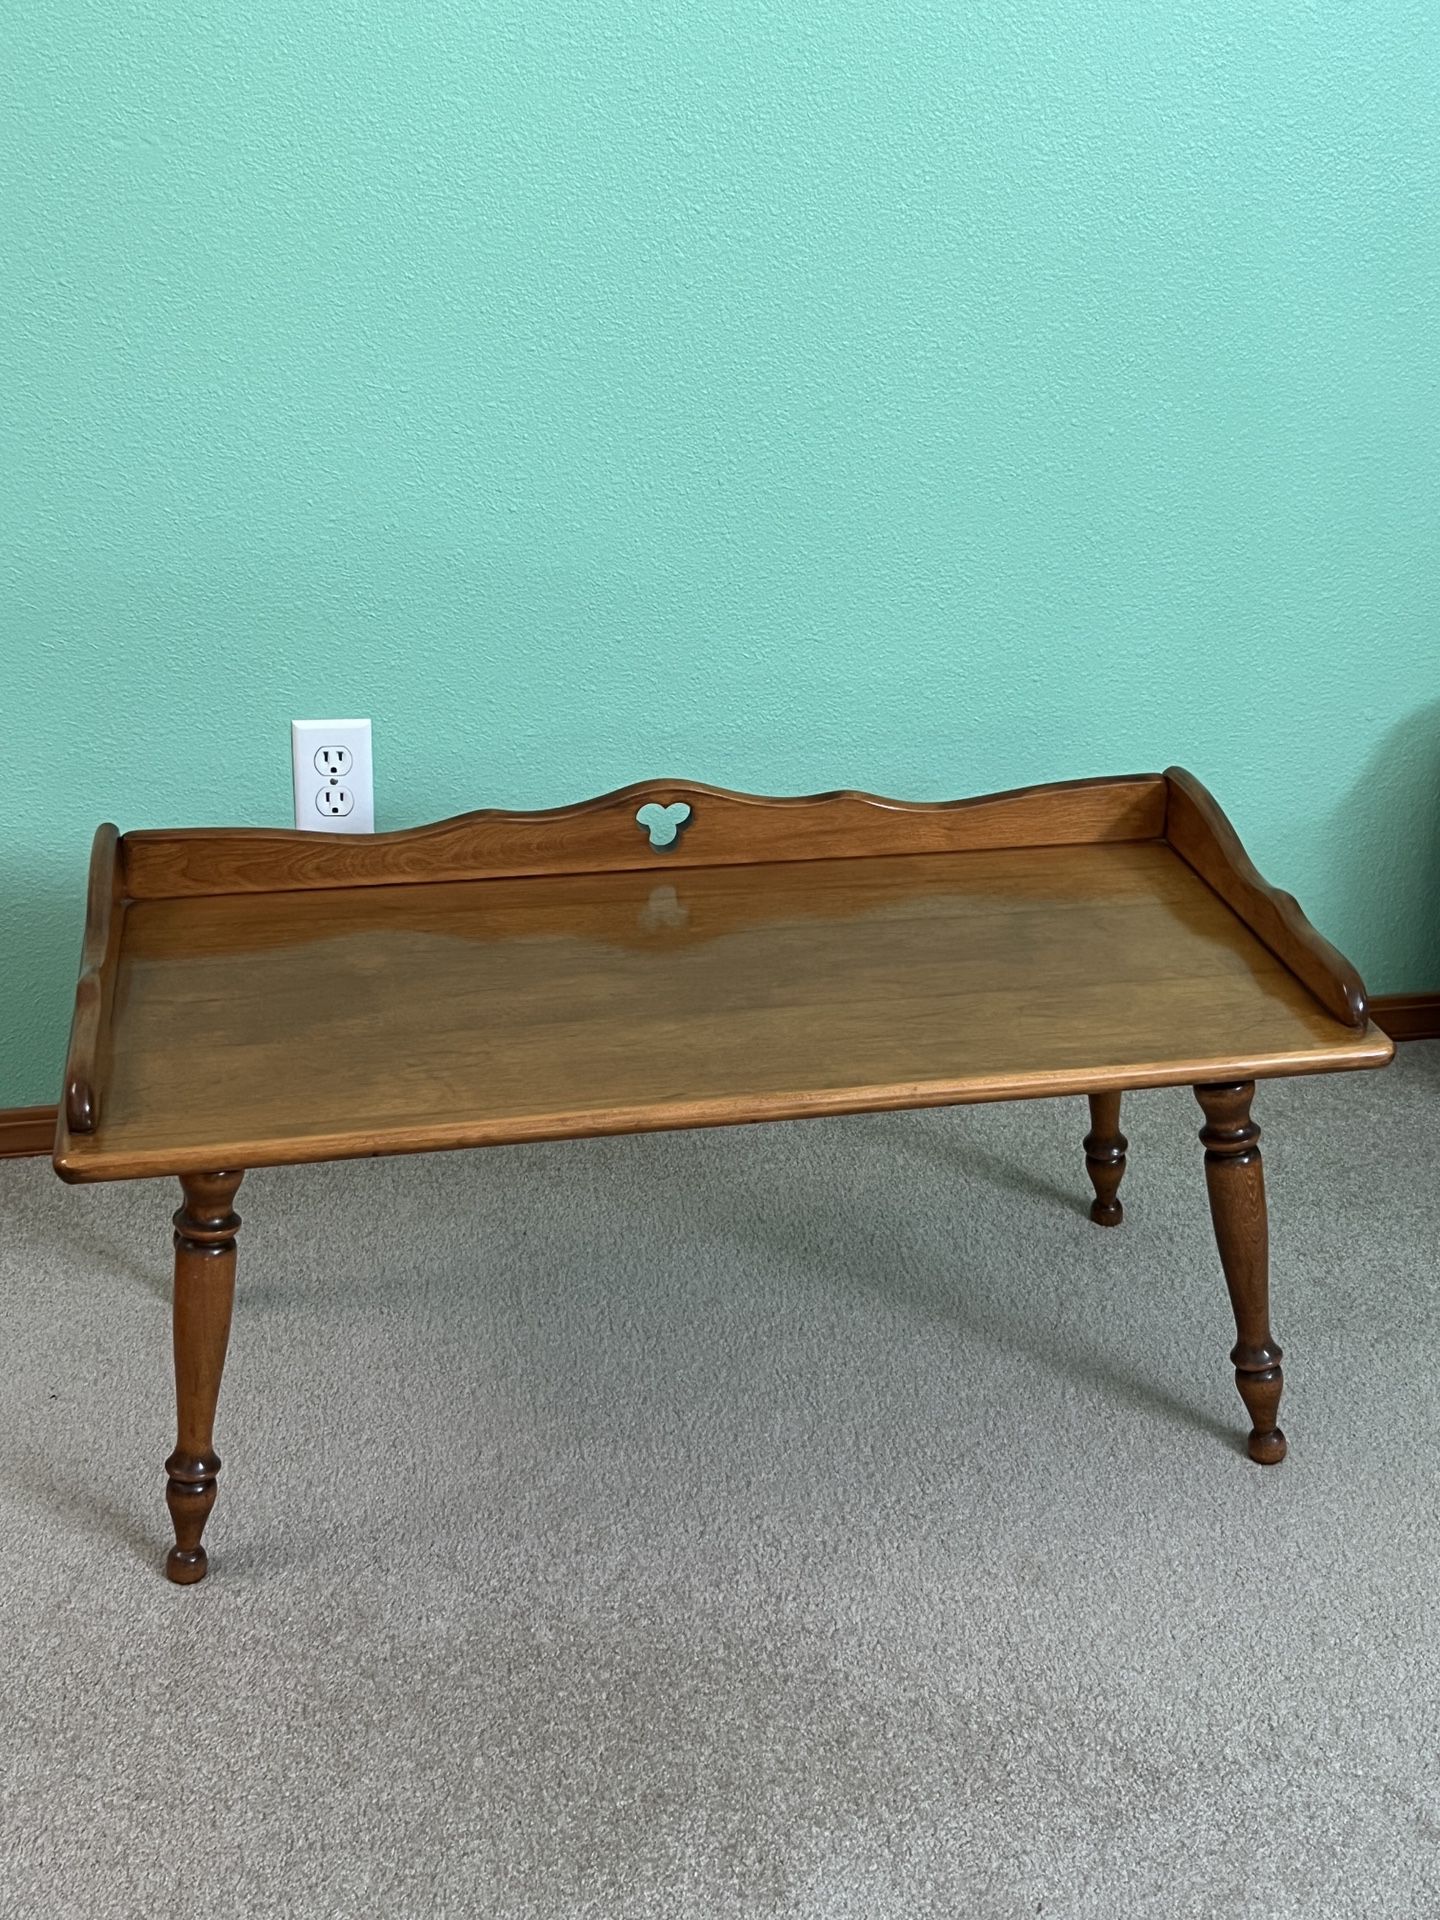 🎈Antique Coffee Table 